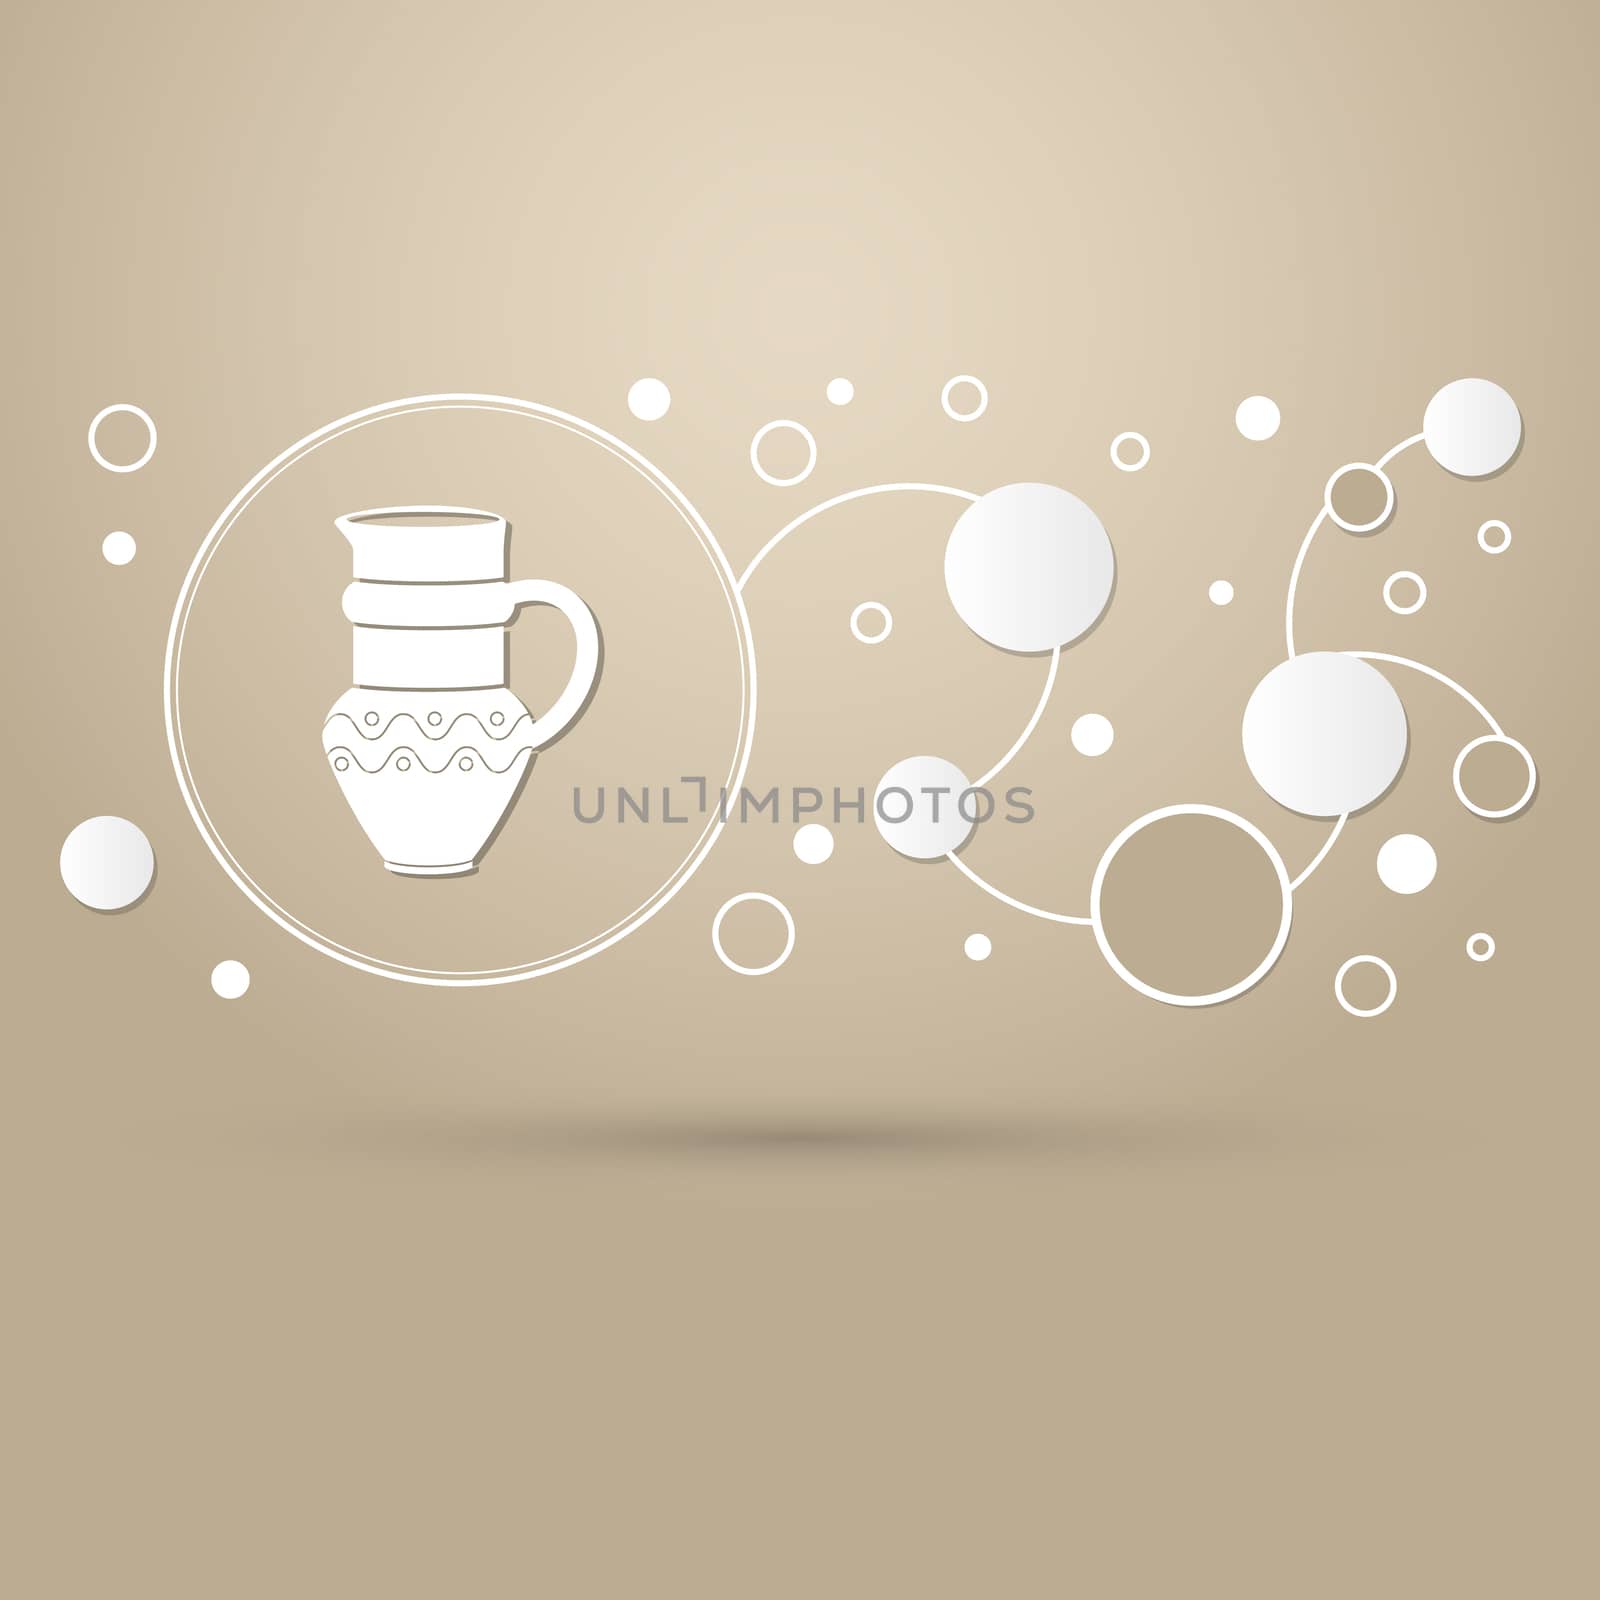 Jug Icon on a brown background with elegant style and modern design infographic. illustration